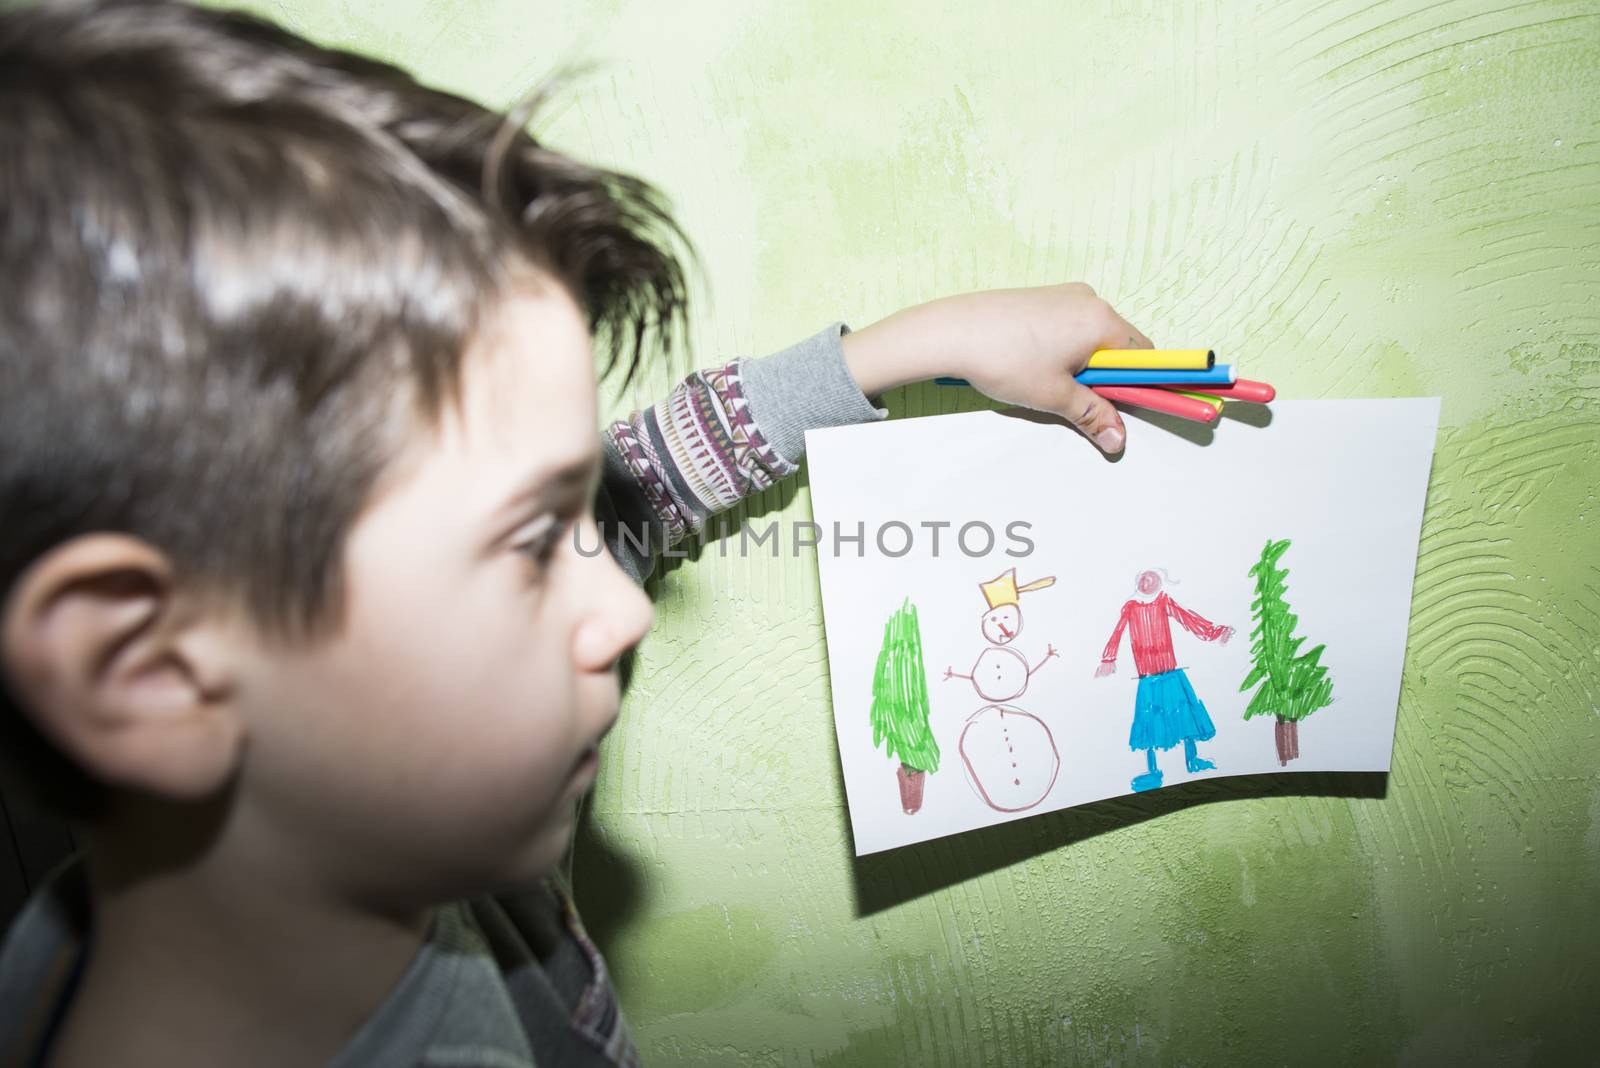 Child shows picture. Direct on camera flash